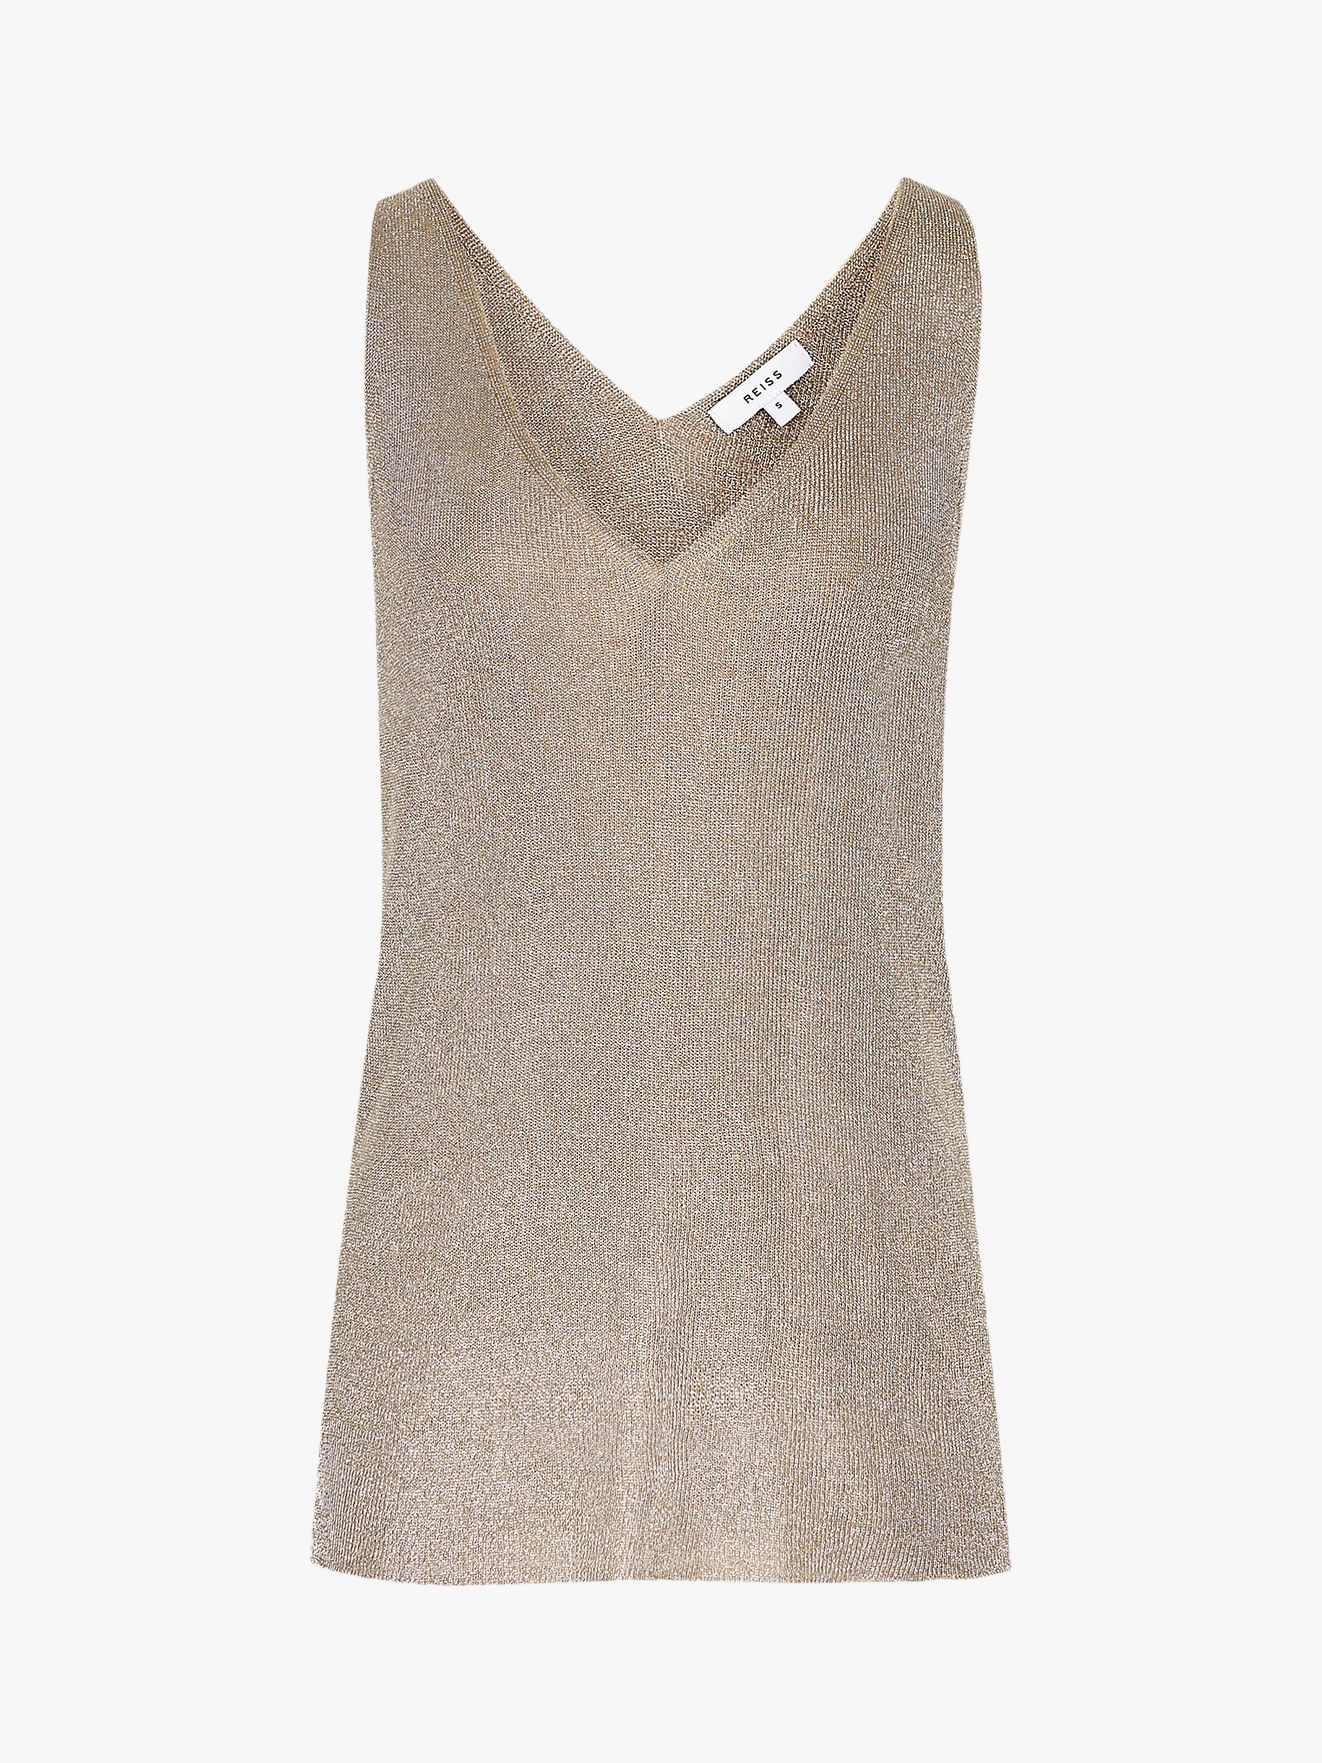 Reiss Alexis Metallic Knitted Vest, Silver, S